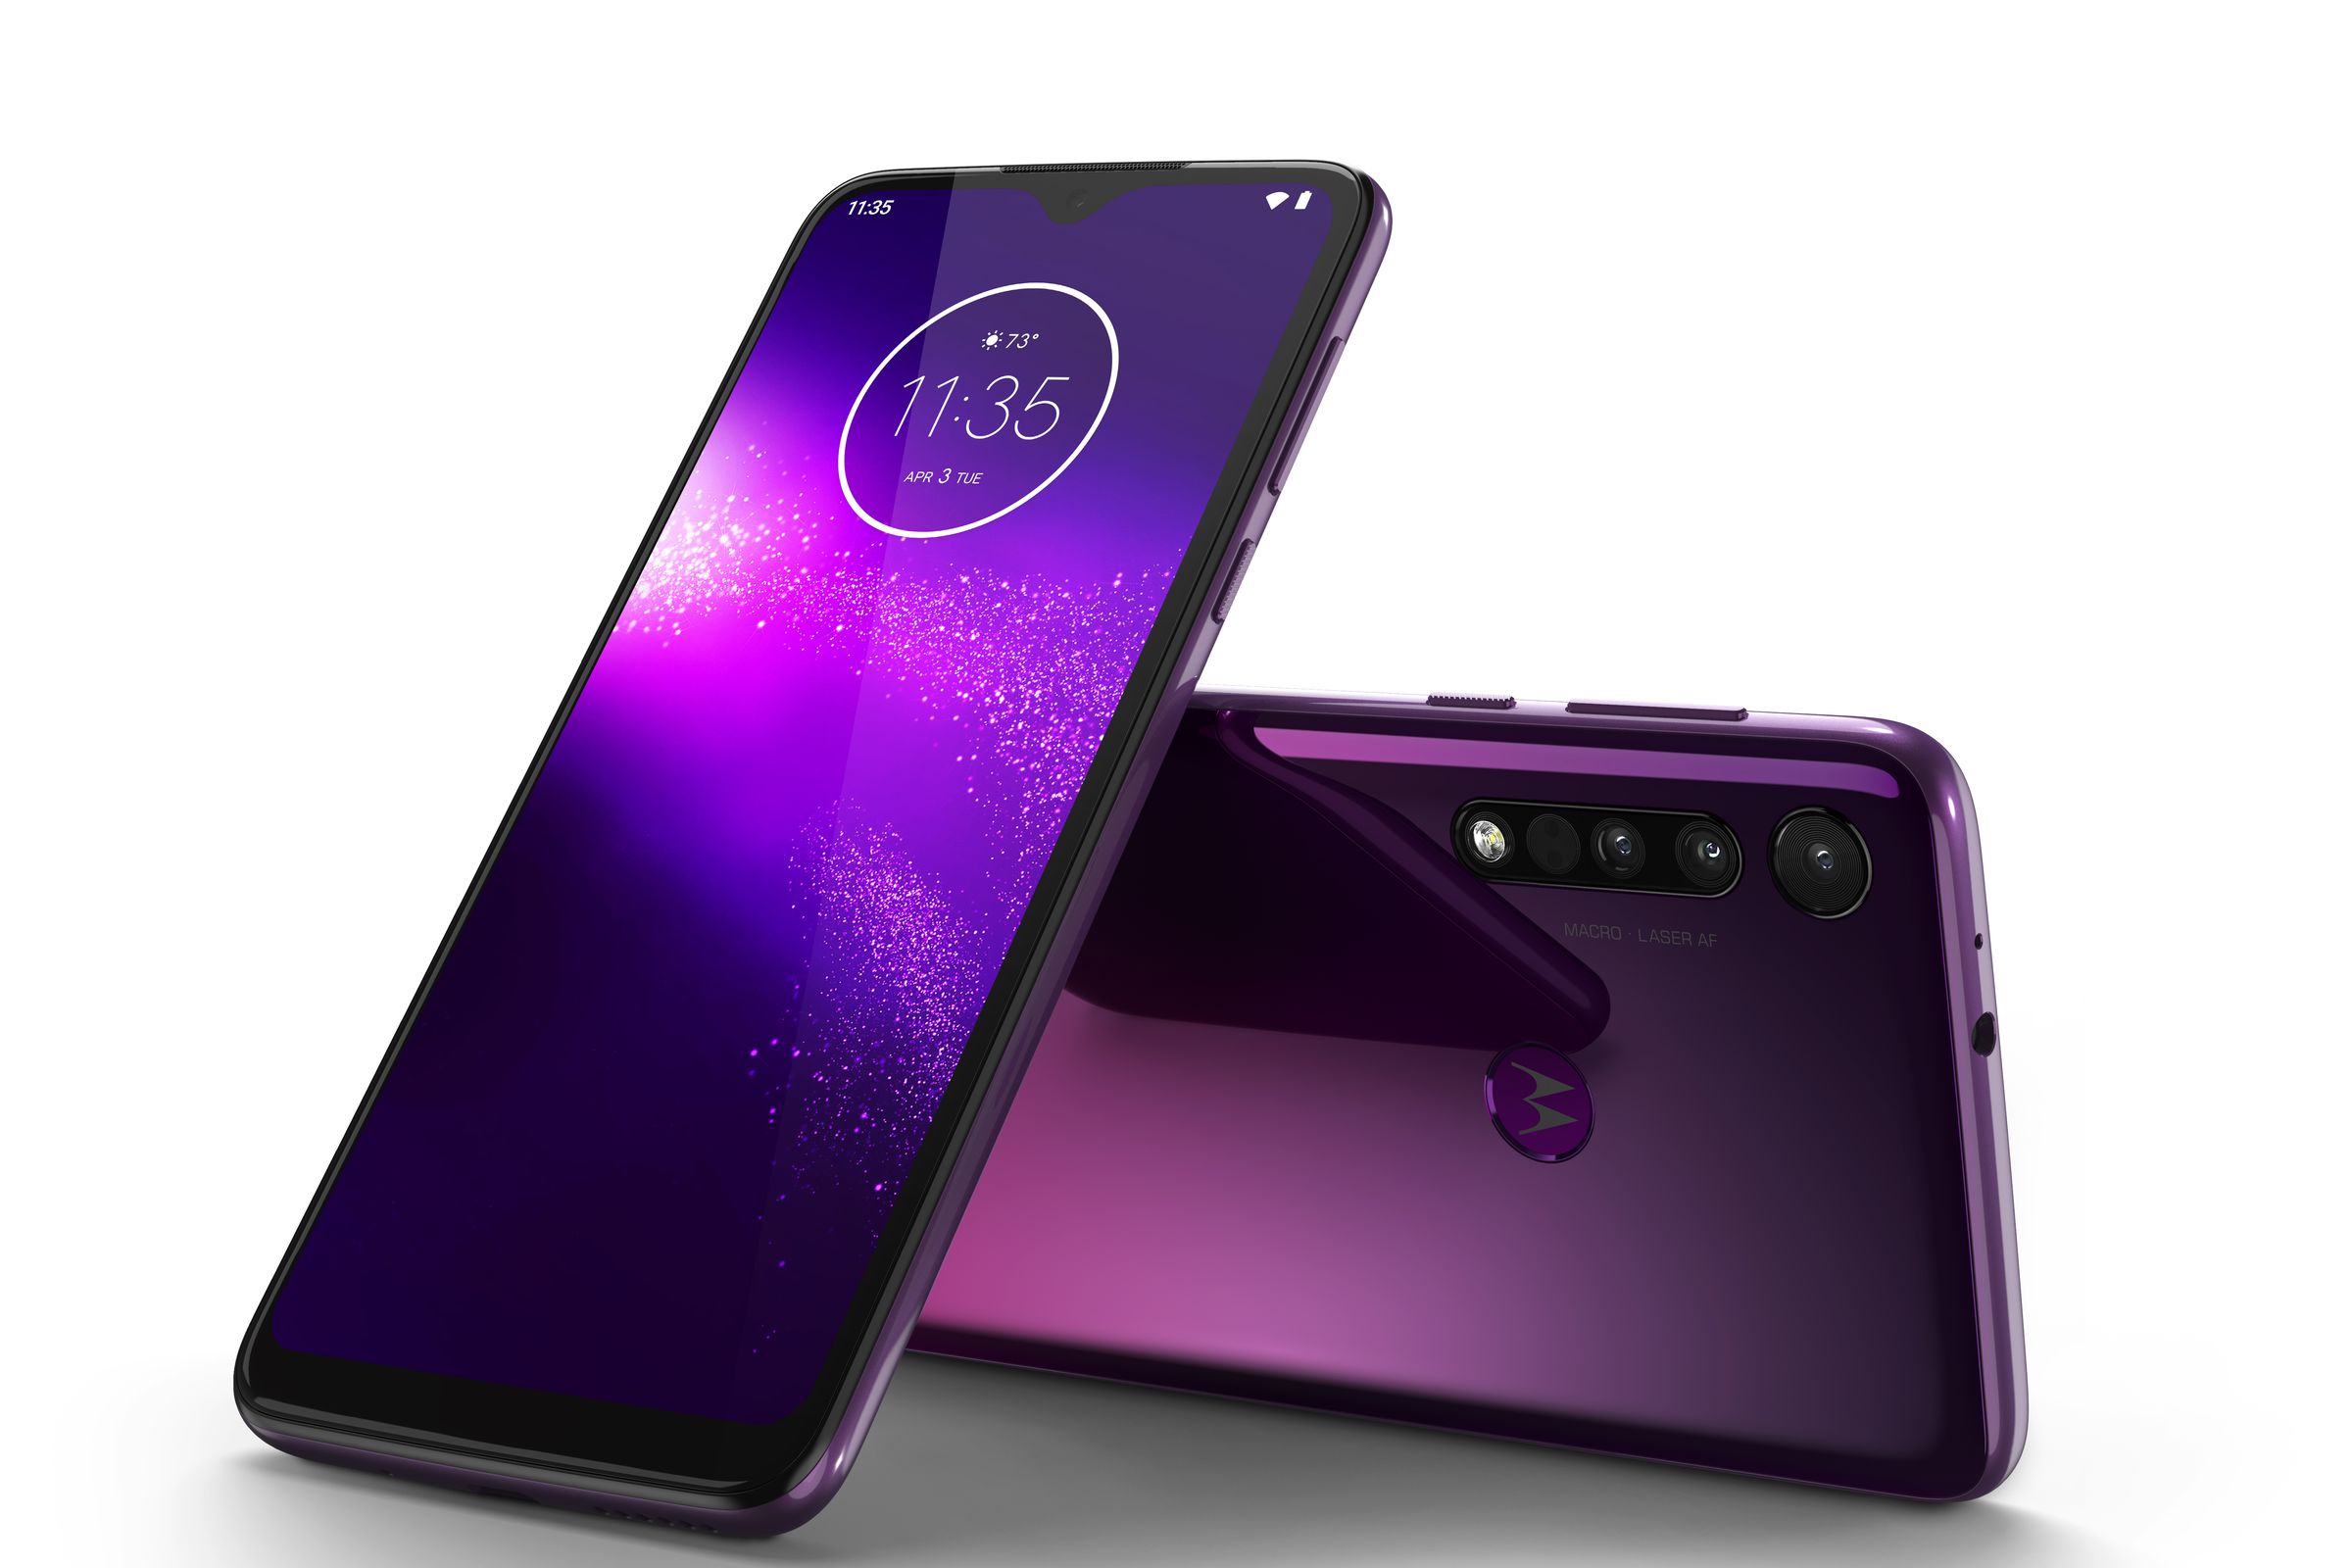 The Motorola One Macro’s big feature is its macro camera, which can focus on objects as little as two cm away.